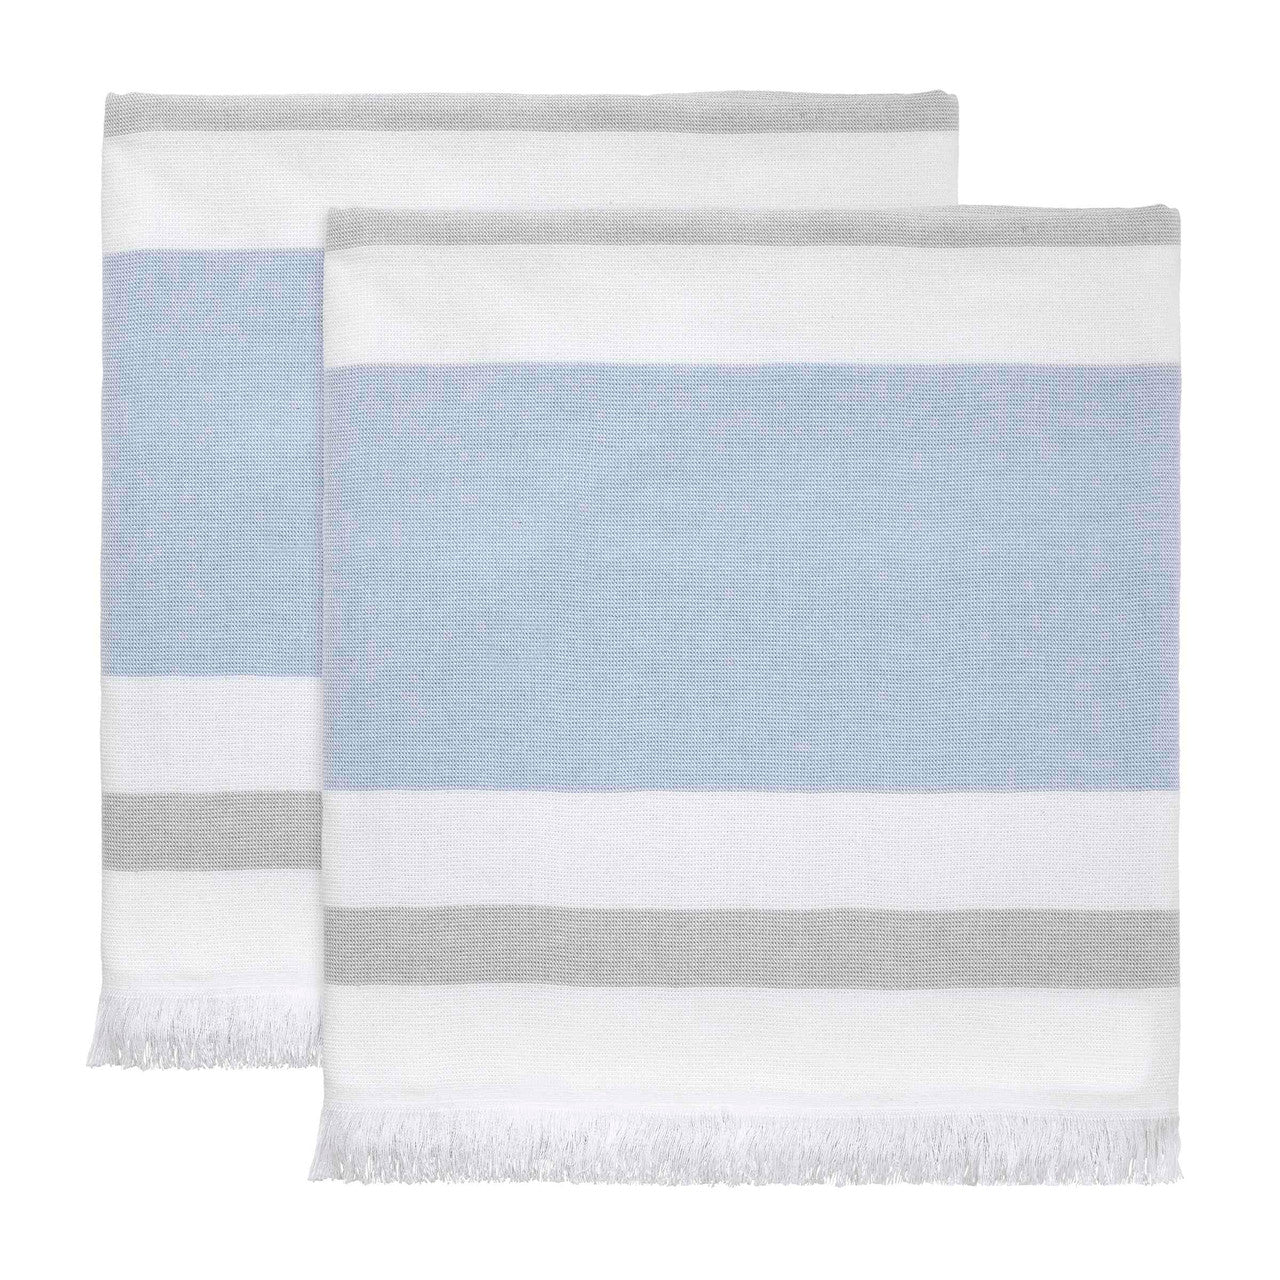 Clubhouse Stripe Towel Blue